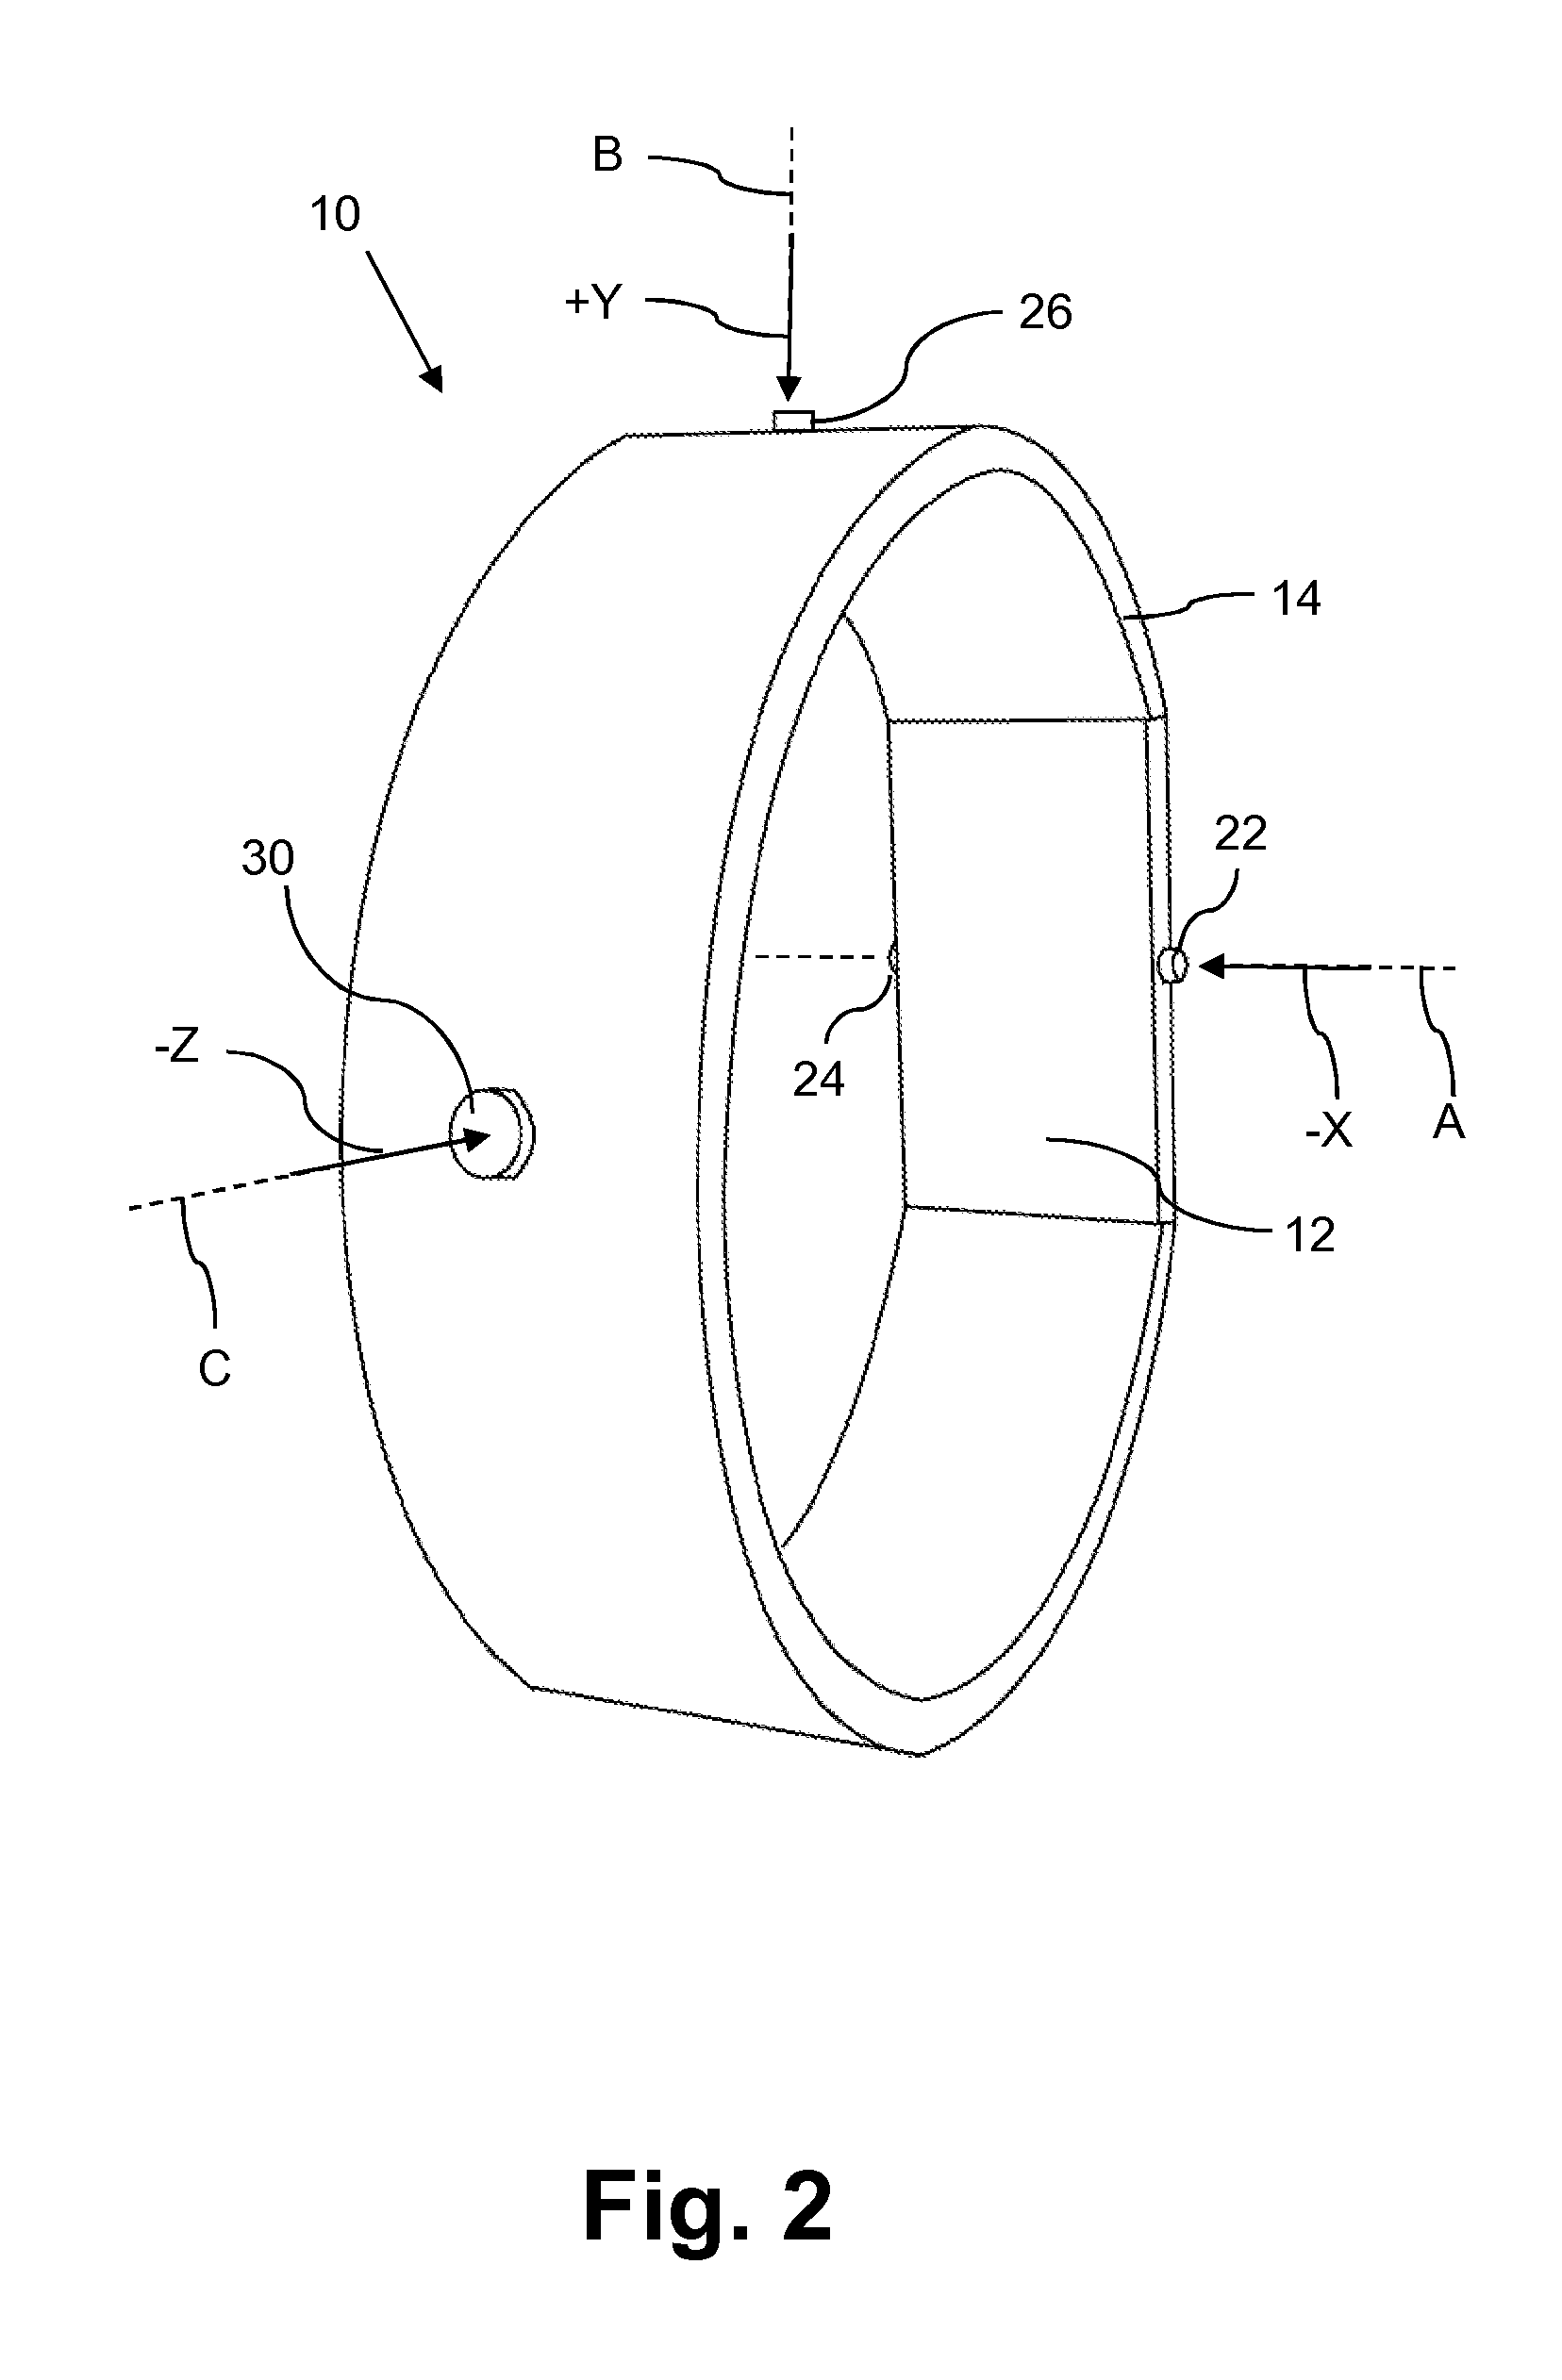 Wrist-worn device for sensing ambient light intensity